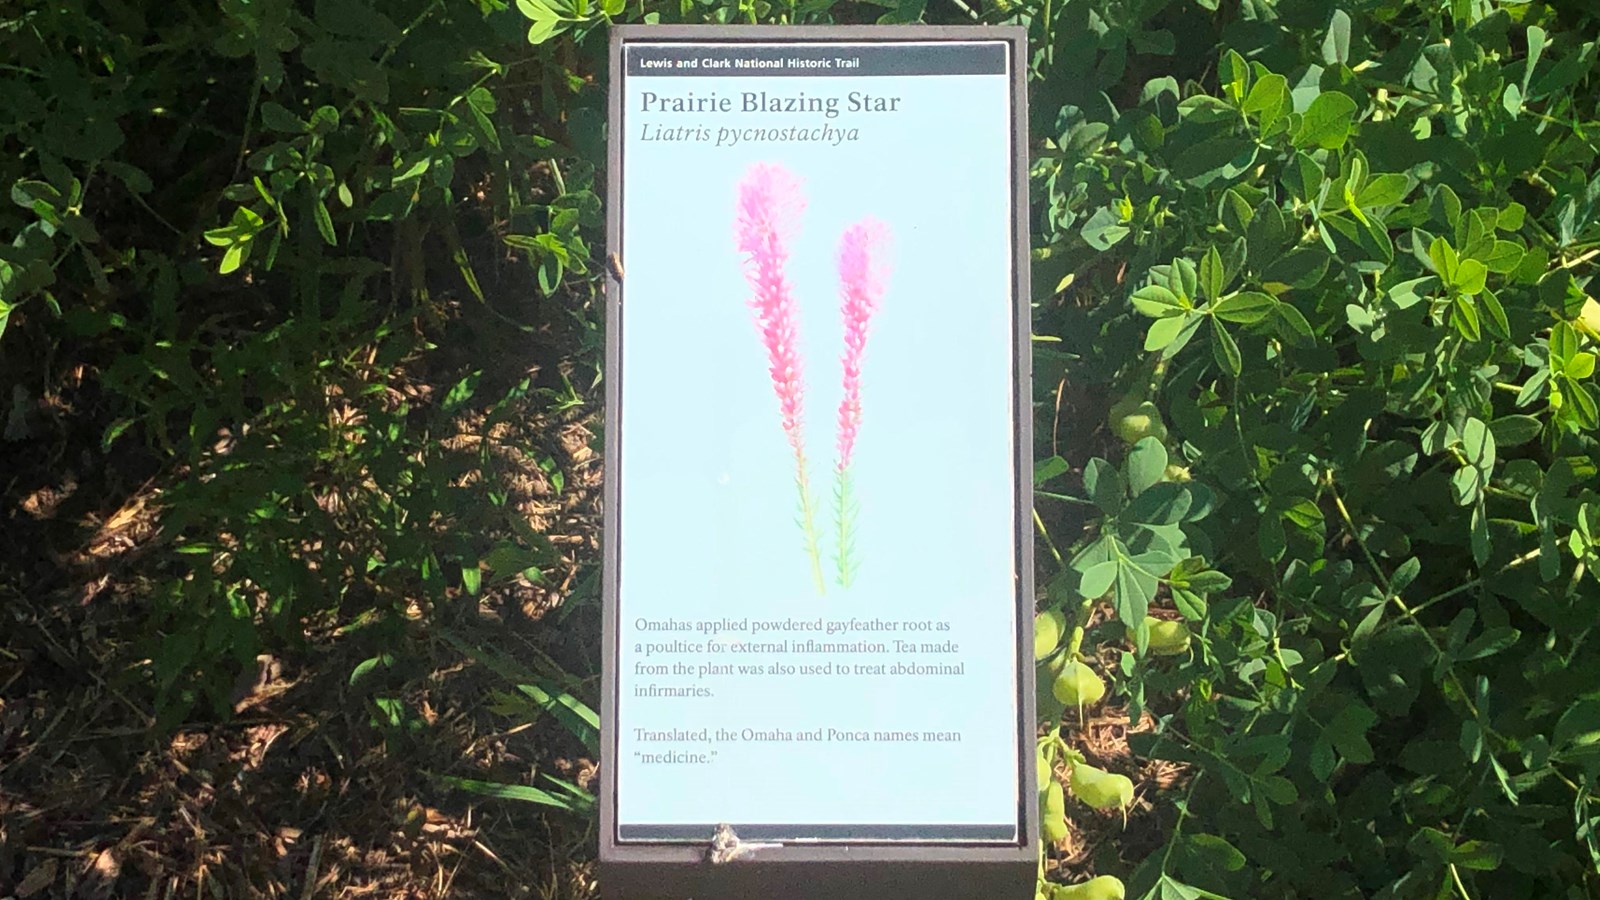 A small sign is placed near a green plant. The sign describes the Prairie Blazing Star.